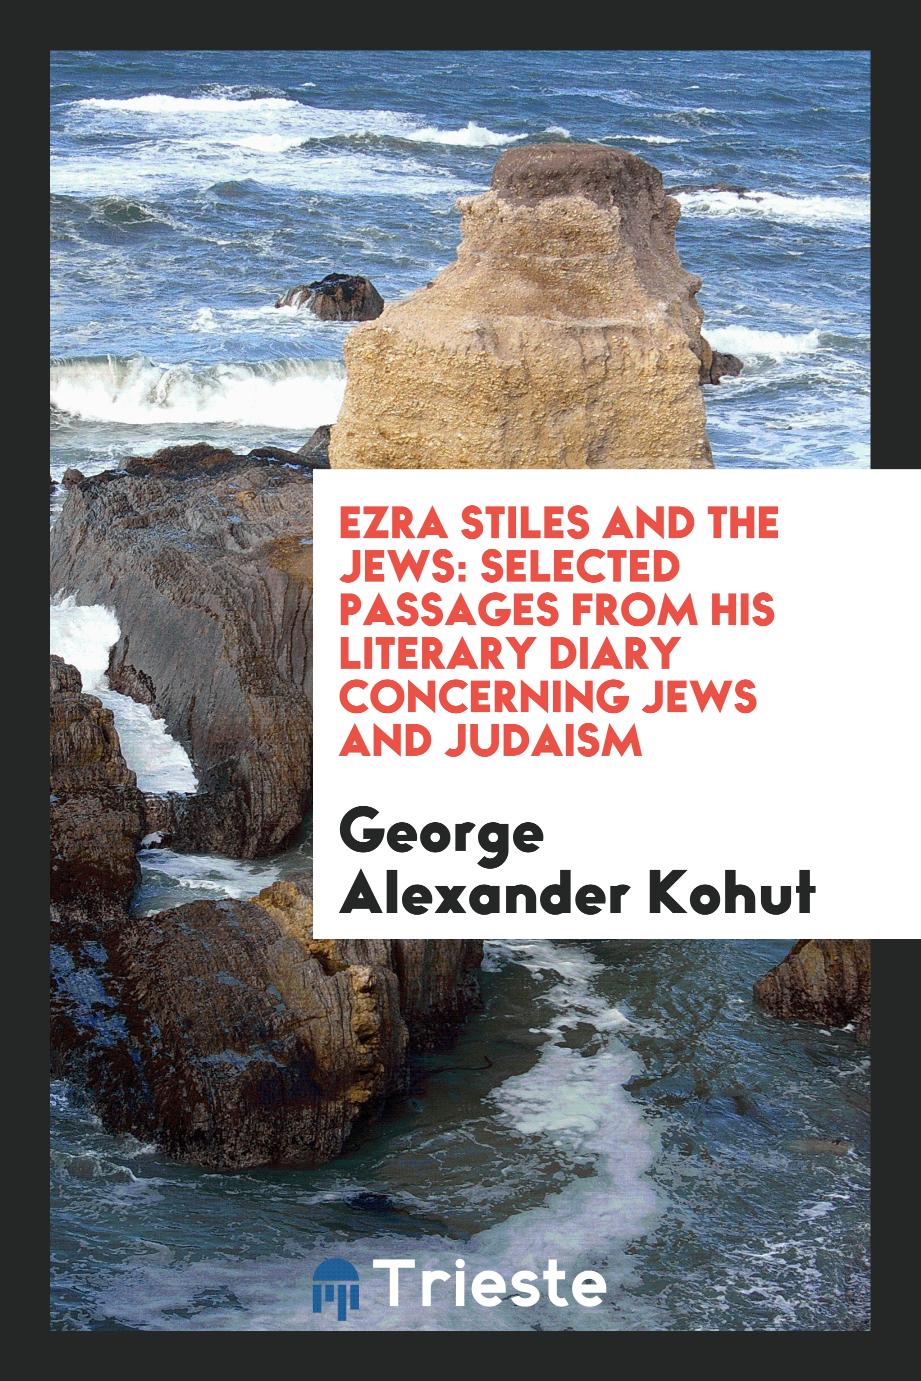 Ezra Stiles and the Jews: Selected Passages from His Literary Diary Concerning Jews and Judaism